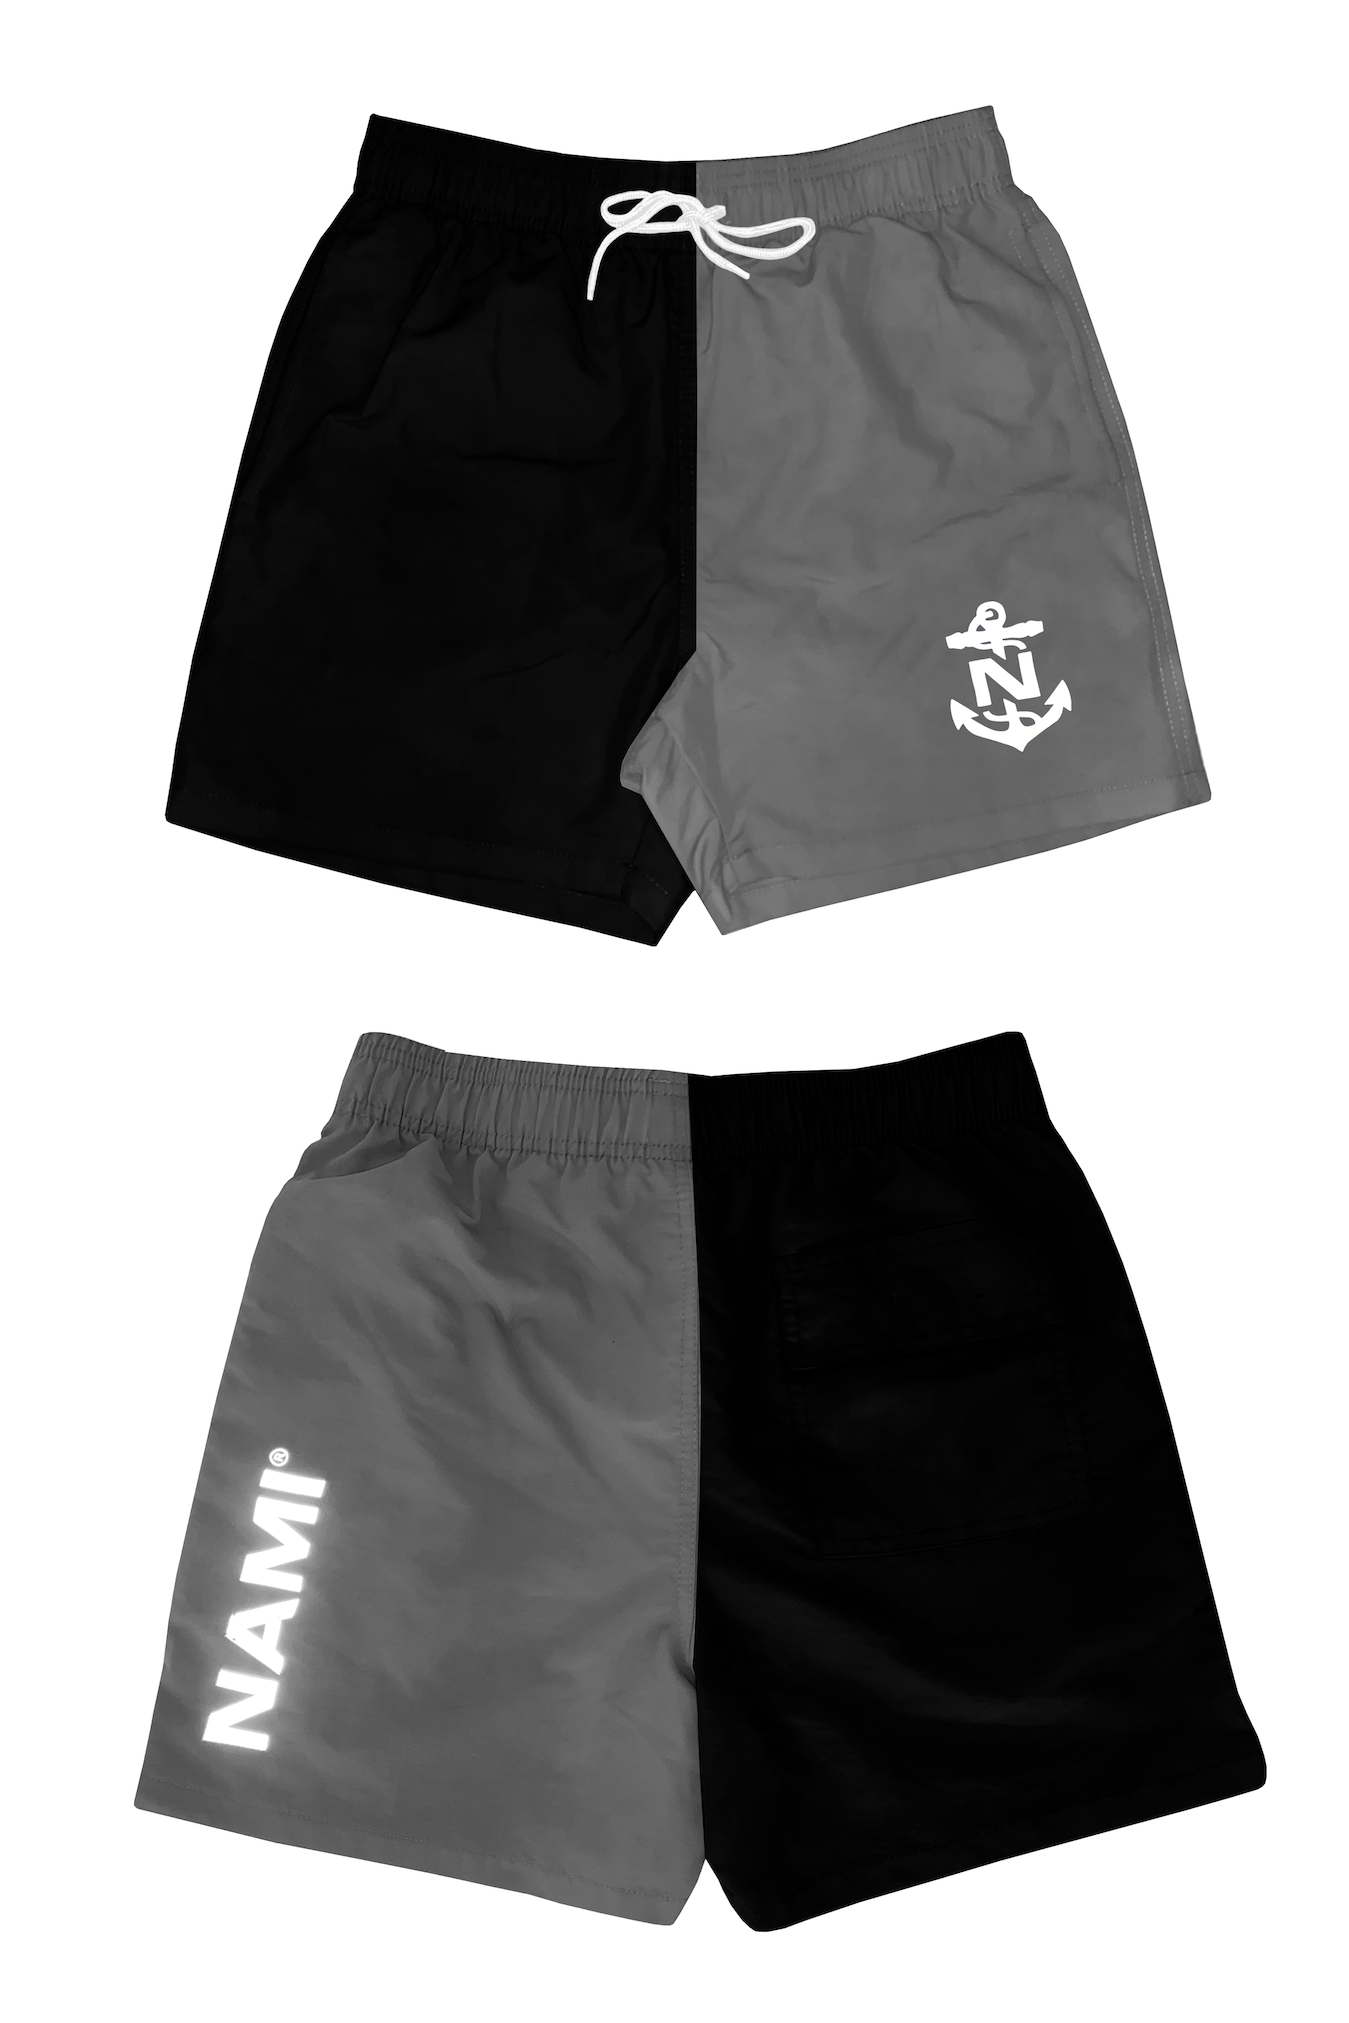 ANCHOR TRUNKS ( TWO TONE )